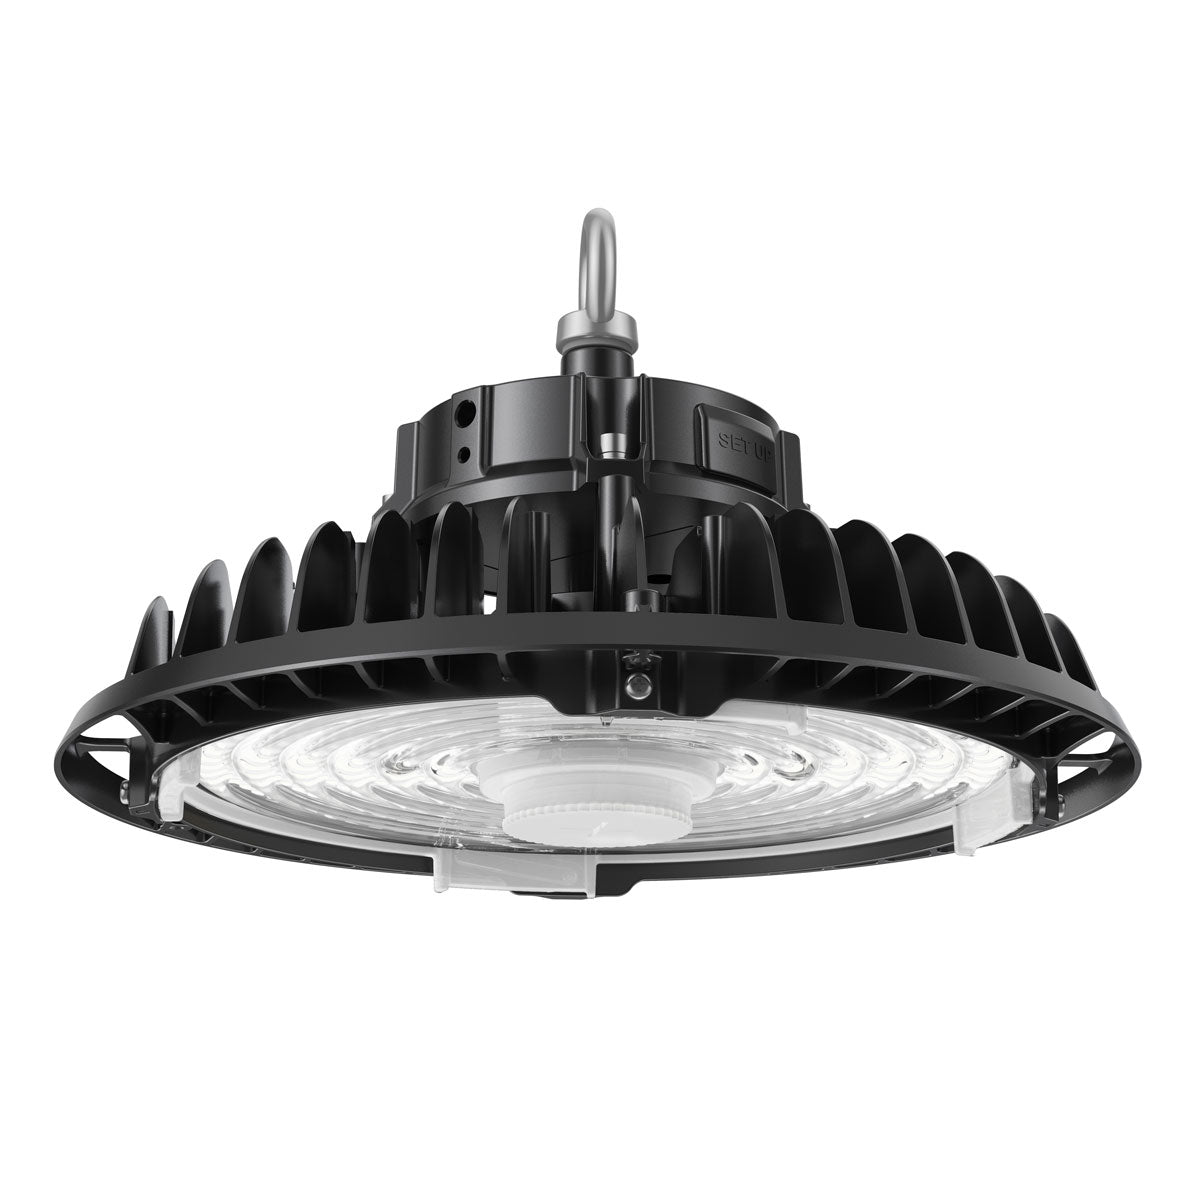 Selectable LUX 2.0 UFO LED High Bay